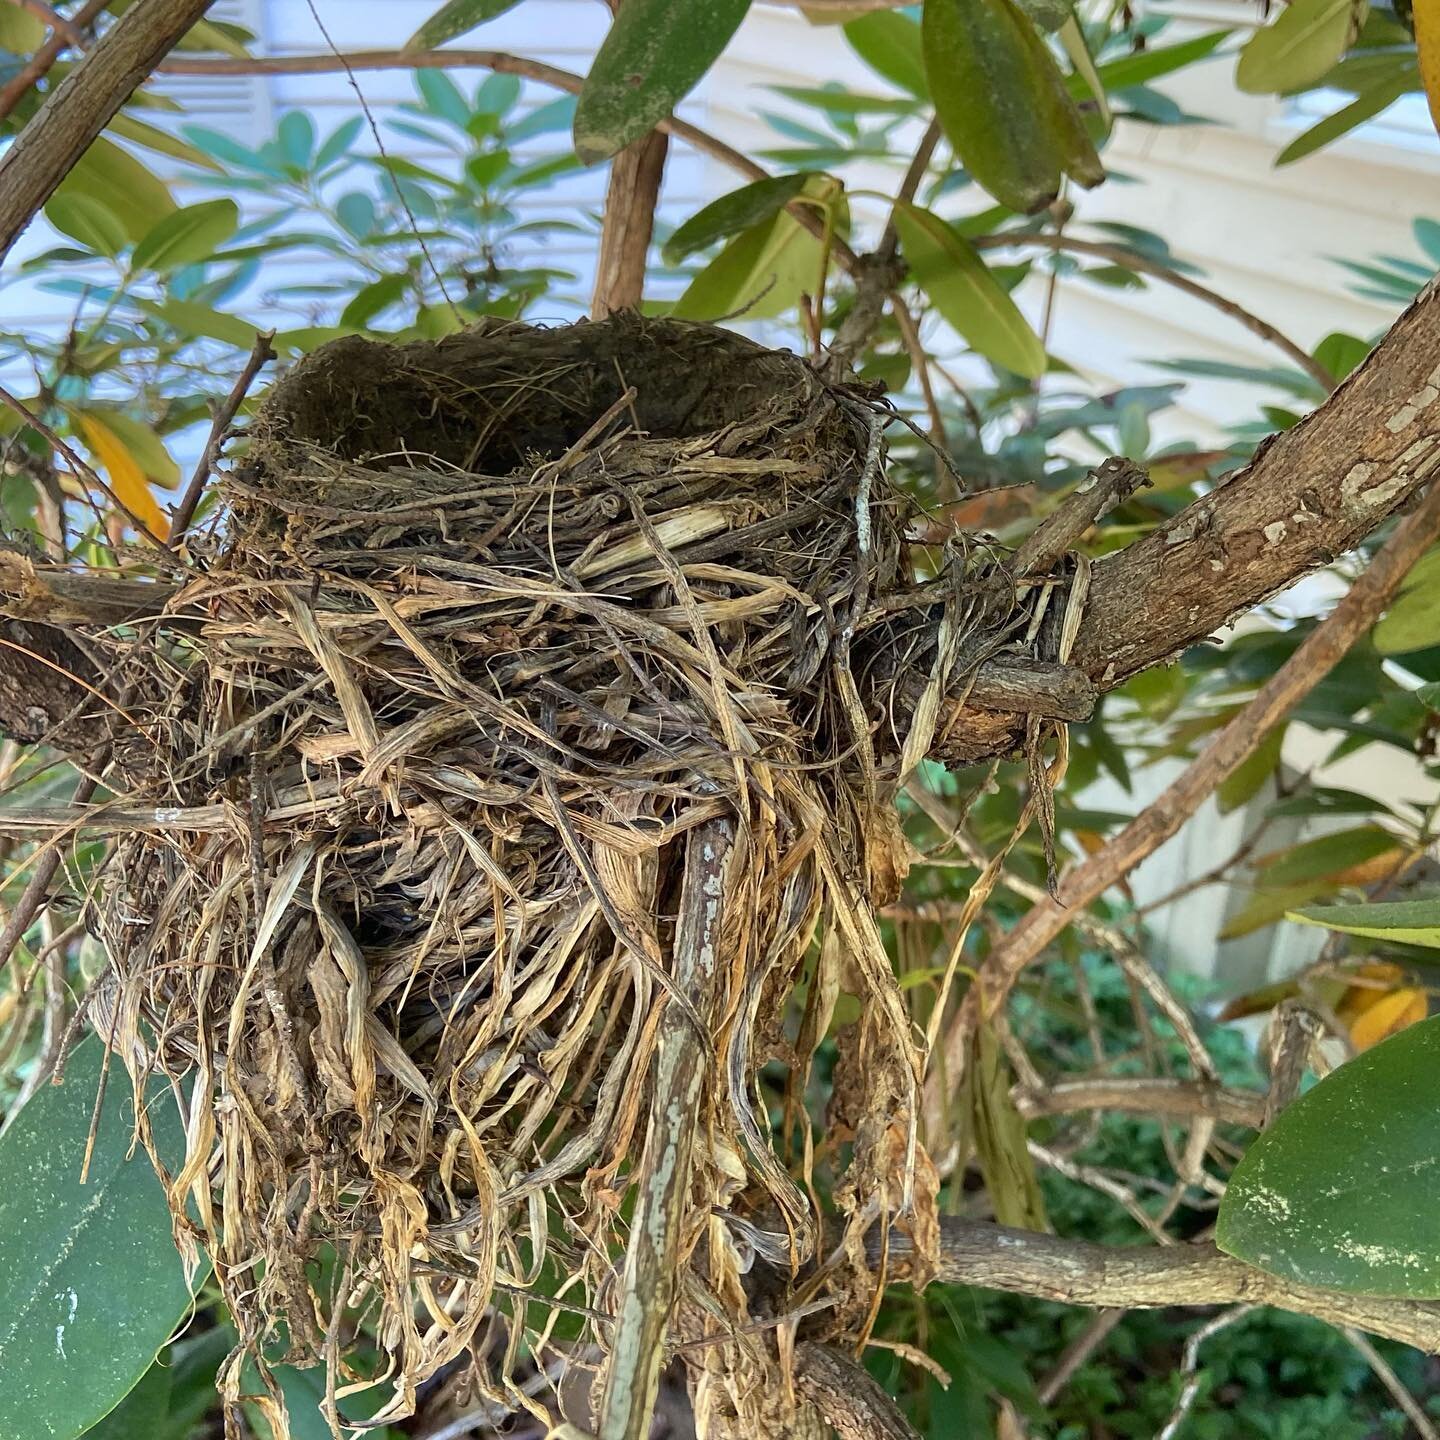 I was cutting down a bush but then saw this. So, I had to@stop. There is a certain beauty to it. #birds #art #nest #sharing